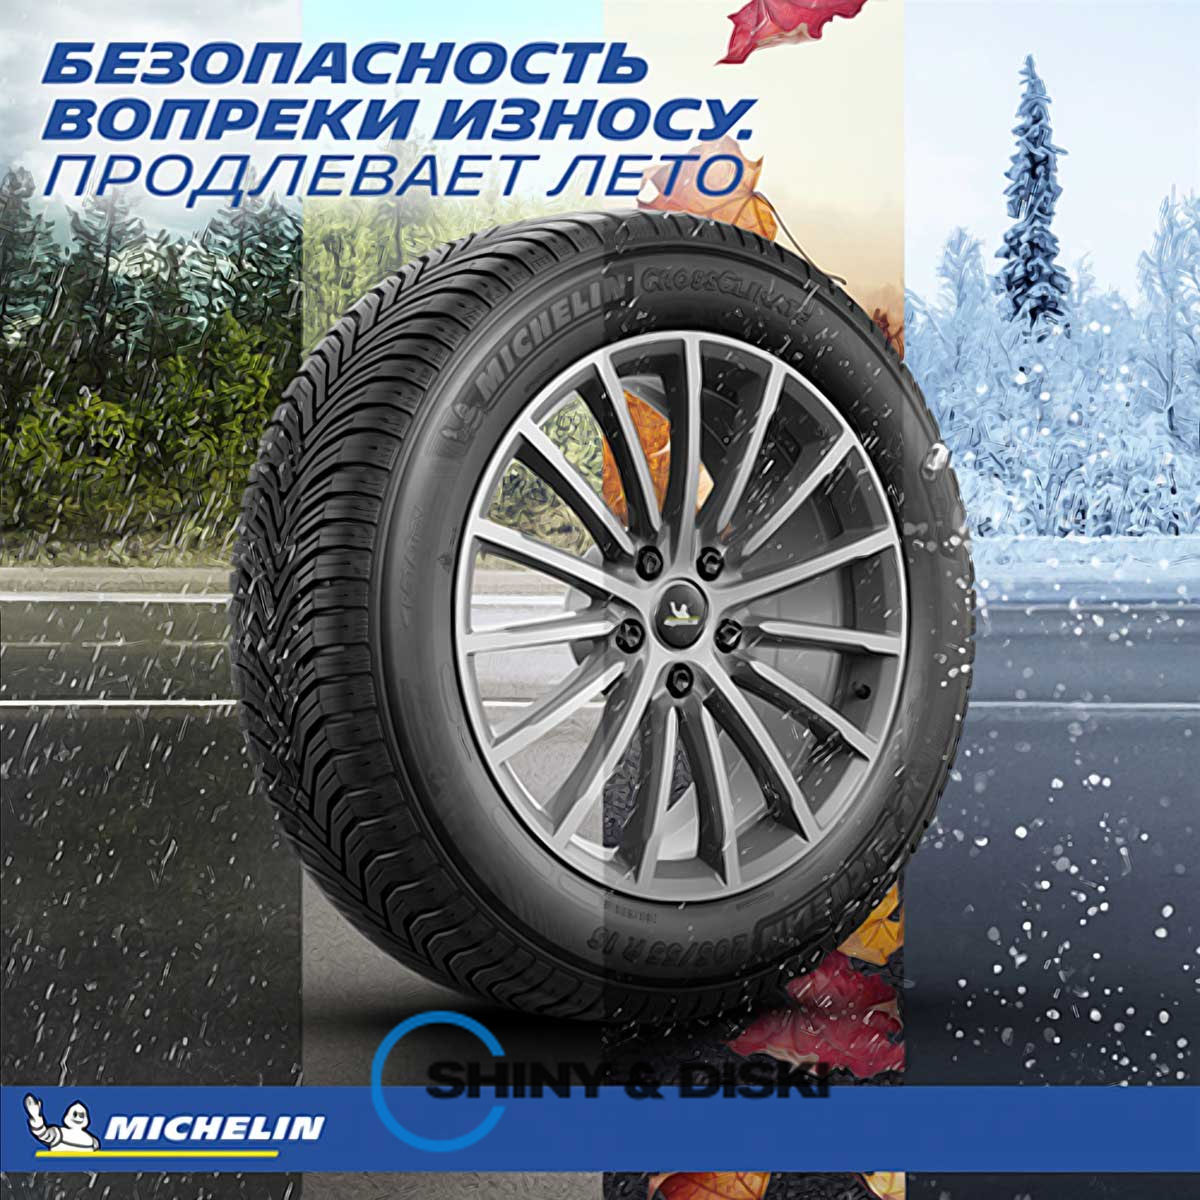 покрышки michelin cross climate+ 215/65 r16 102v xl